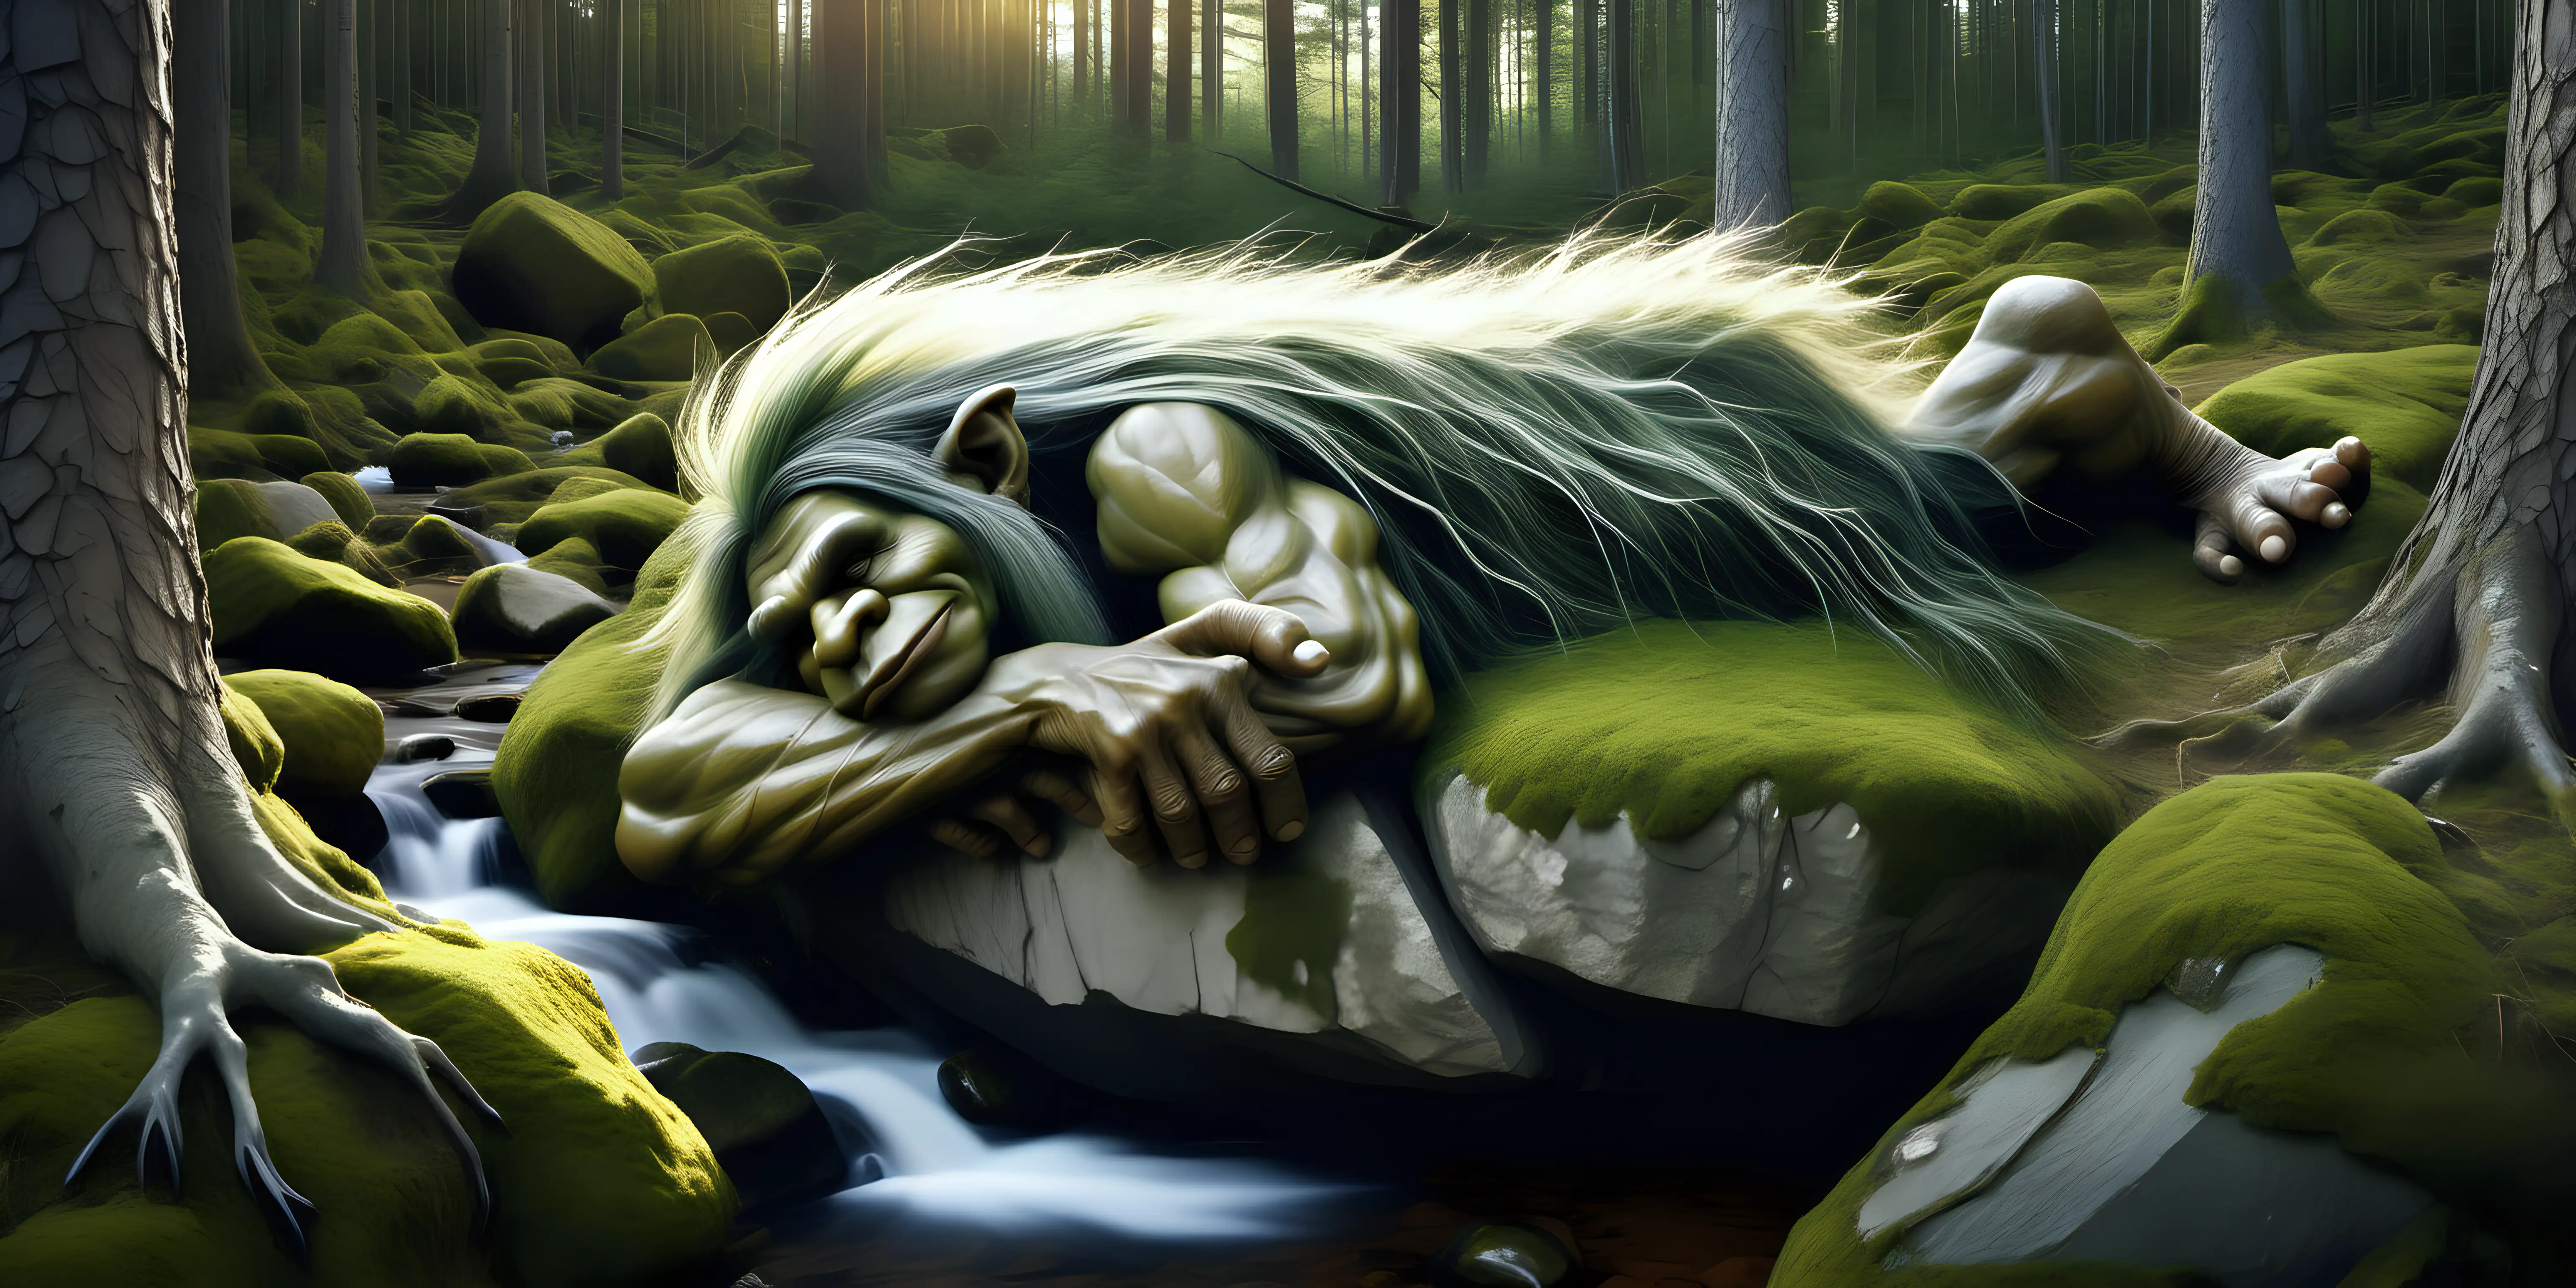 Peaceful Sleep of a Norwegian Folklore Troll in Ancient Green Pine Forest